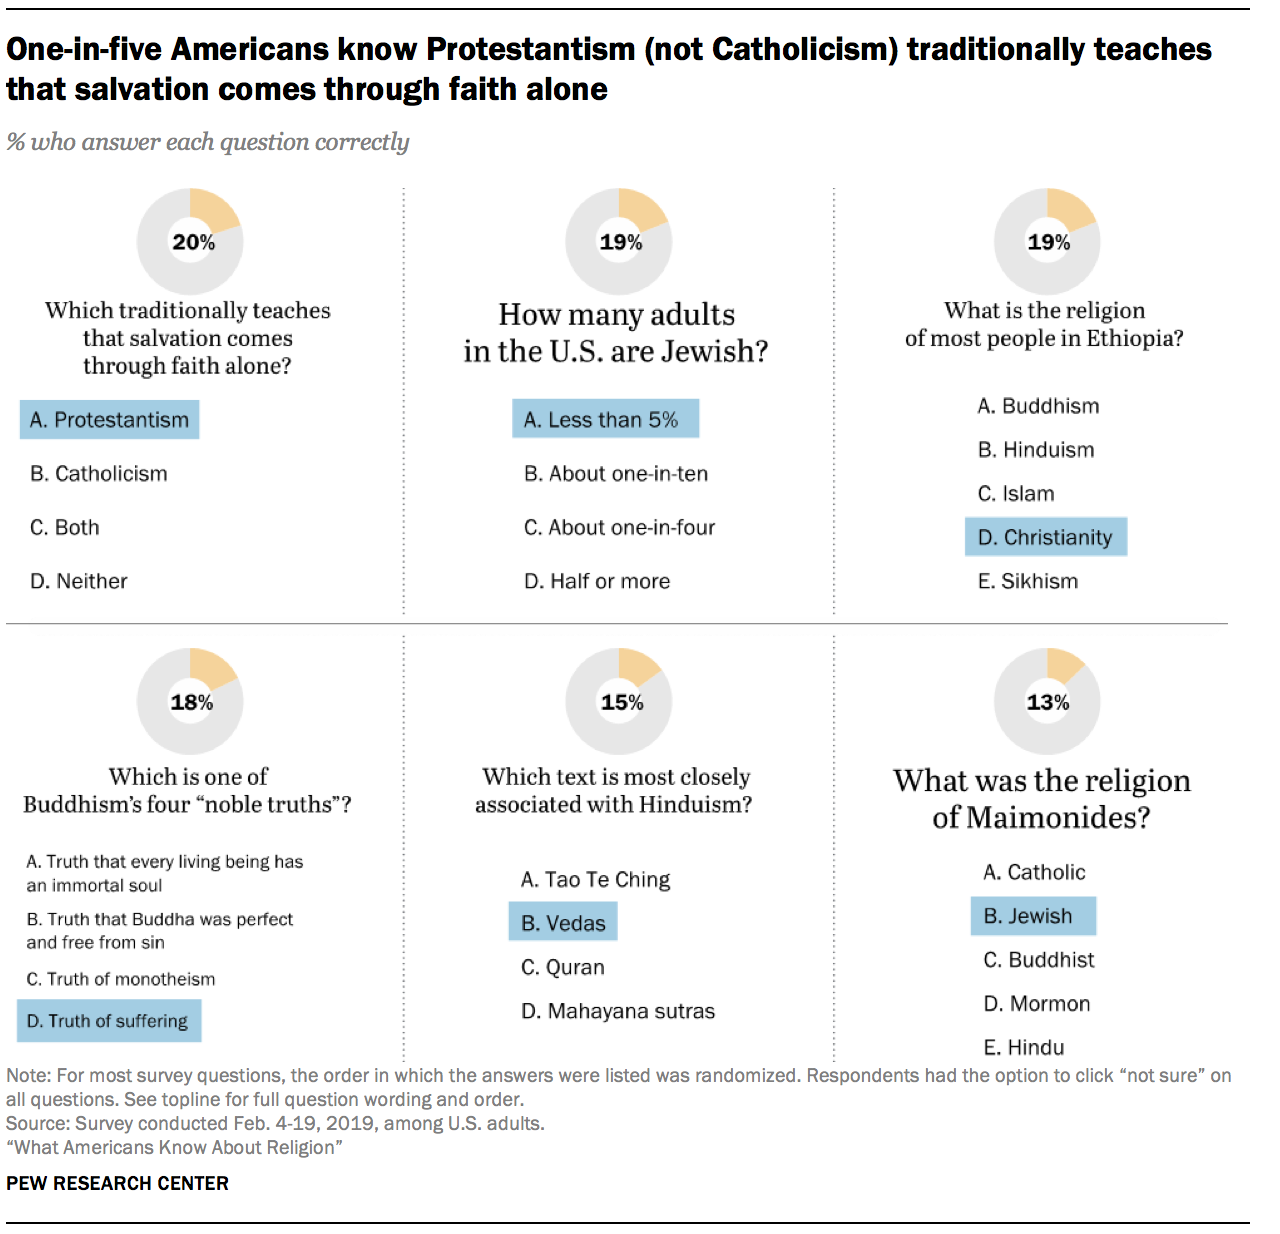 One-in-five Americans know Protestantism (not Catholicism) traditionally teaches that salvation comes through faith alone